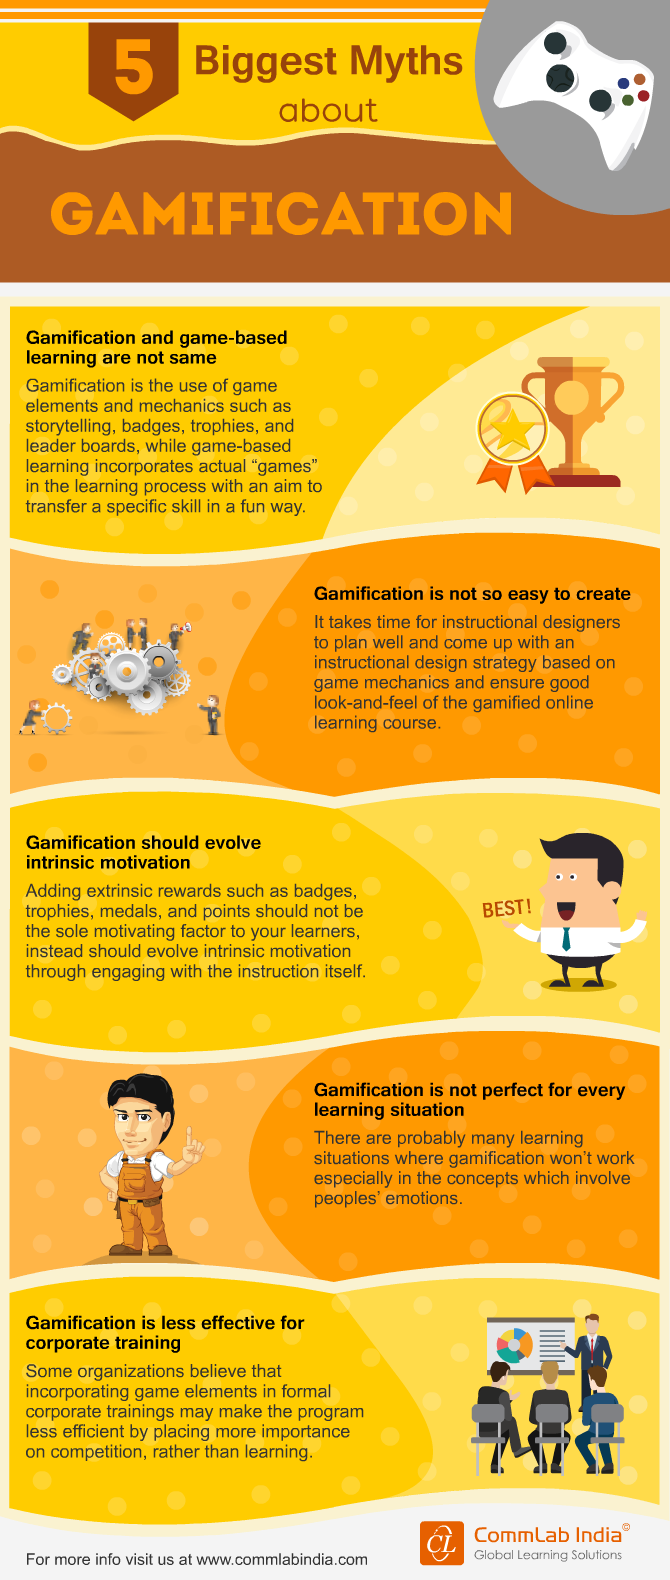 5 Biggest Myths about Gamification [Infographic]